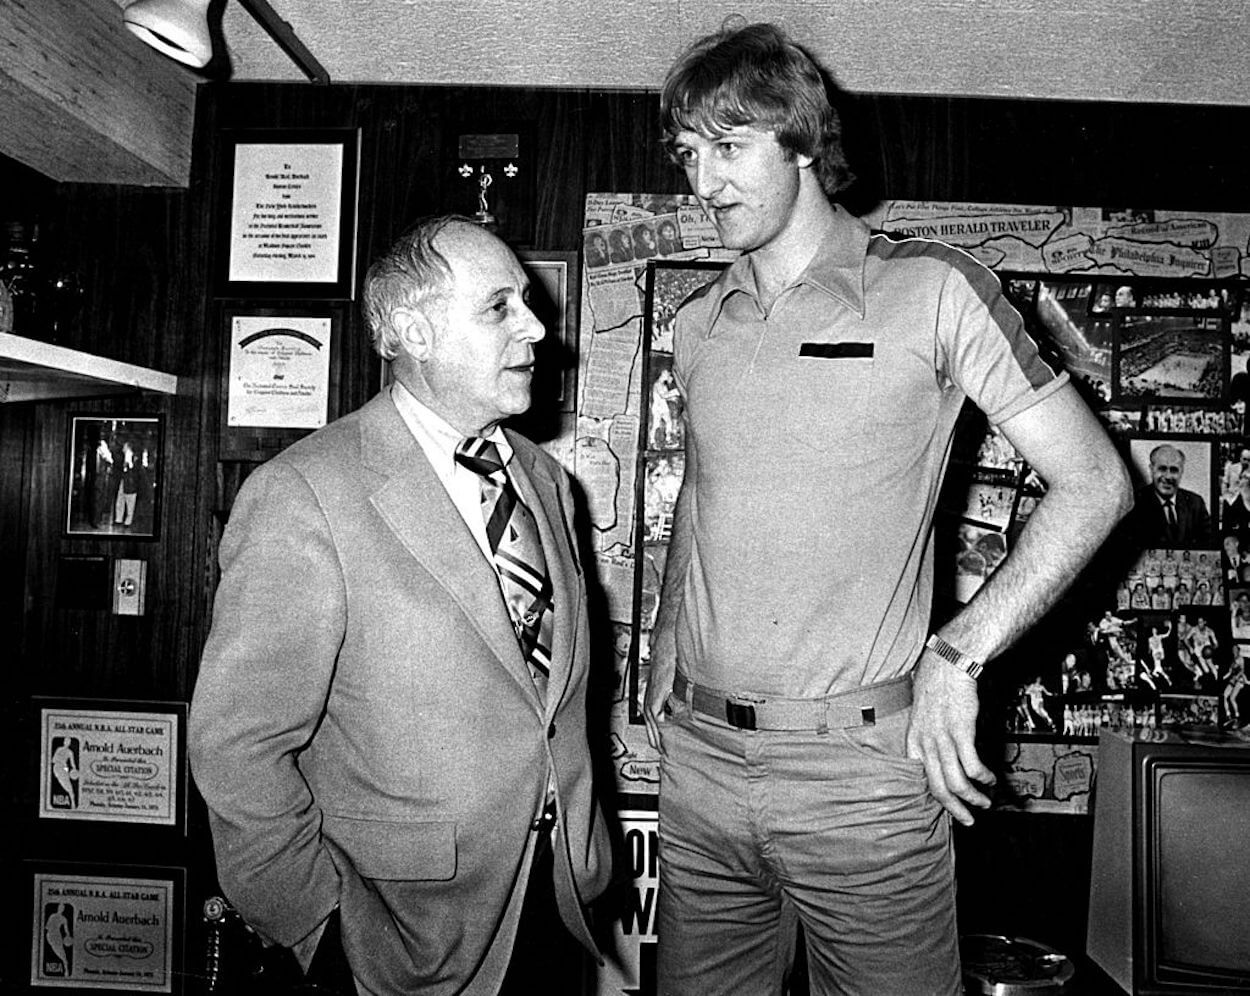 Larry Bird (R) and Red Auerbach (L) in conversation.